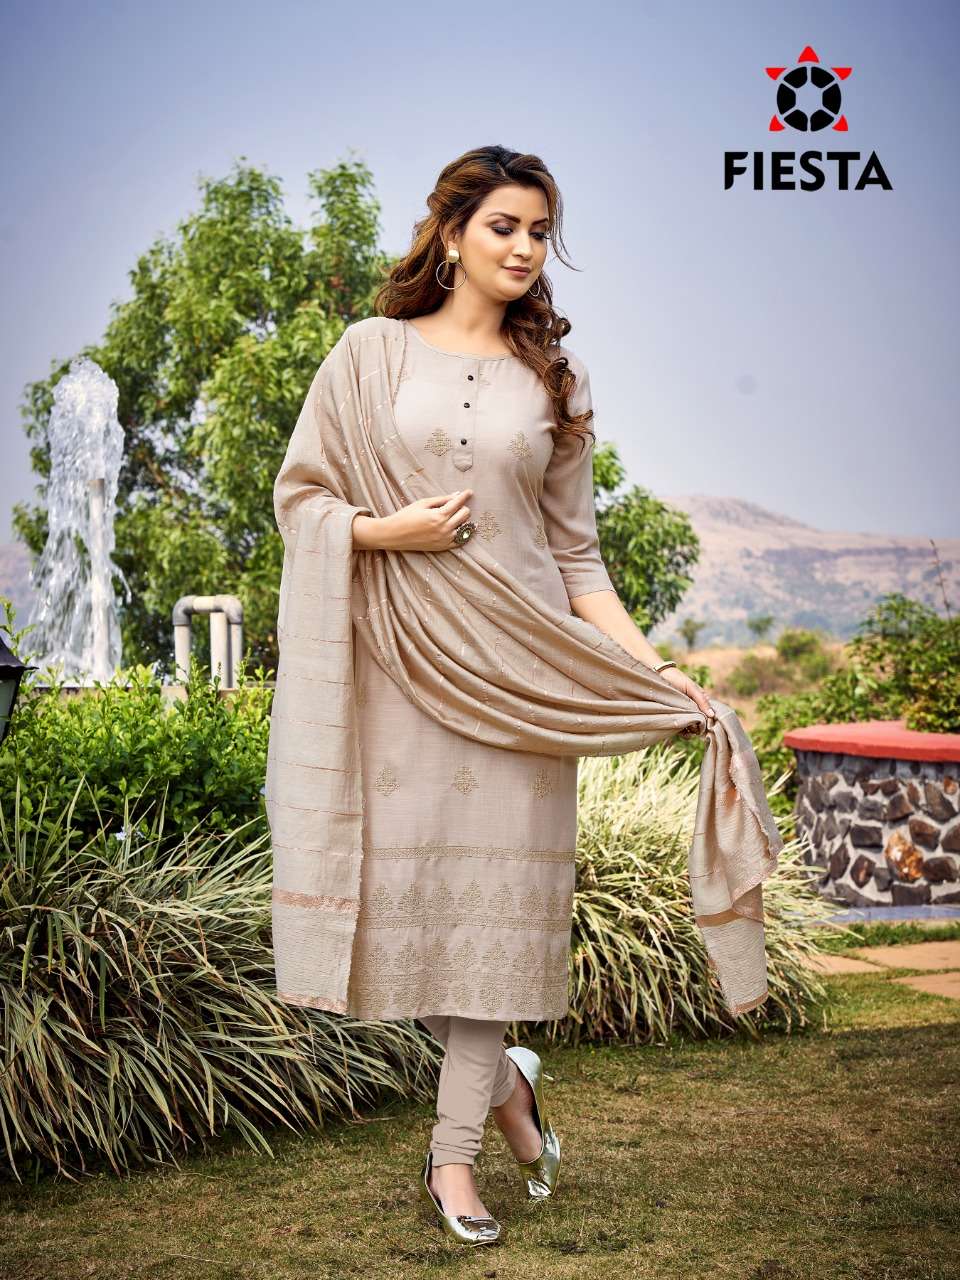 HARLEY BY FIESTA 24001 TO 24007 SERIES DESIGNER STYLISH FANCY COLORFUL BEAUTIFUL PARTY WEAR & ETHNIC WEAR COLLECTION RAYON SLUB EMBROIDERY KURTIS WITH DUPATTA AT WHOLESALE PRICE